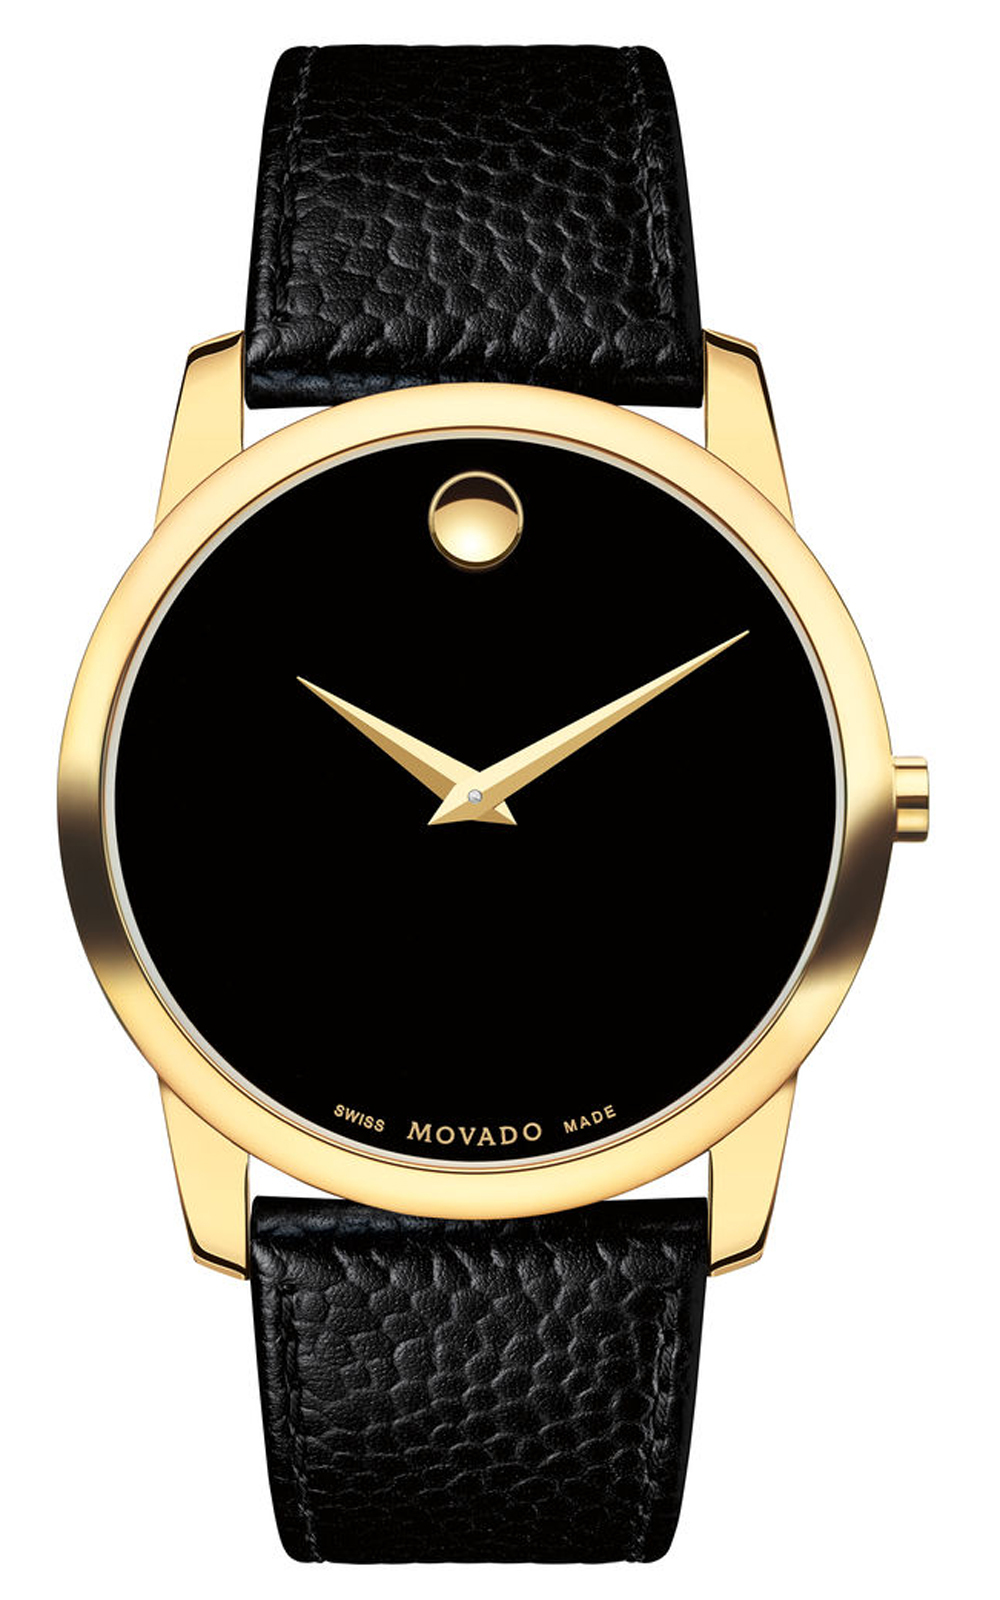 Đồng hồ Movado Museum Gold Plated case Watch 0607014, 40mm